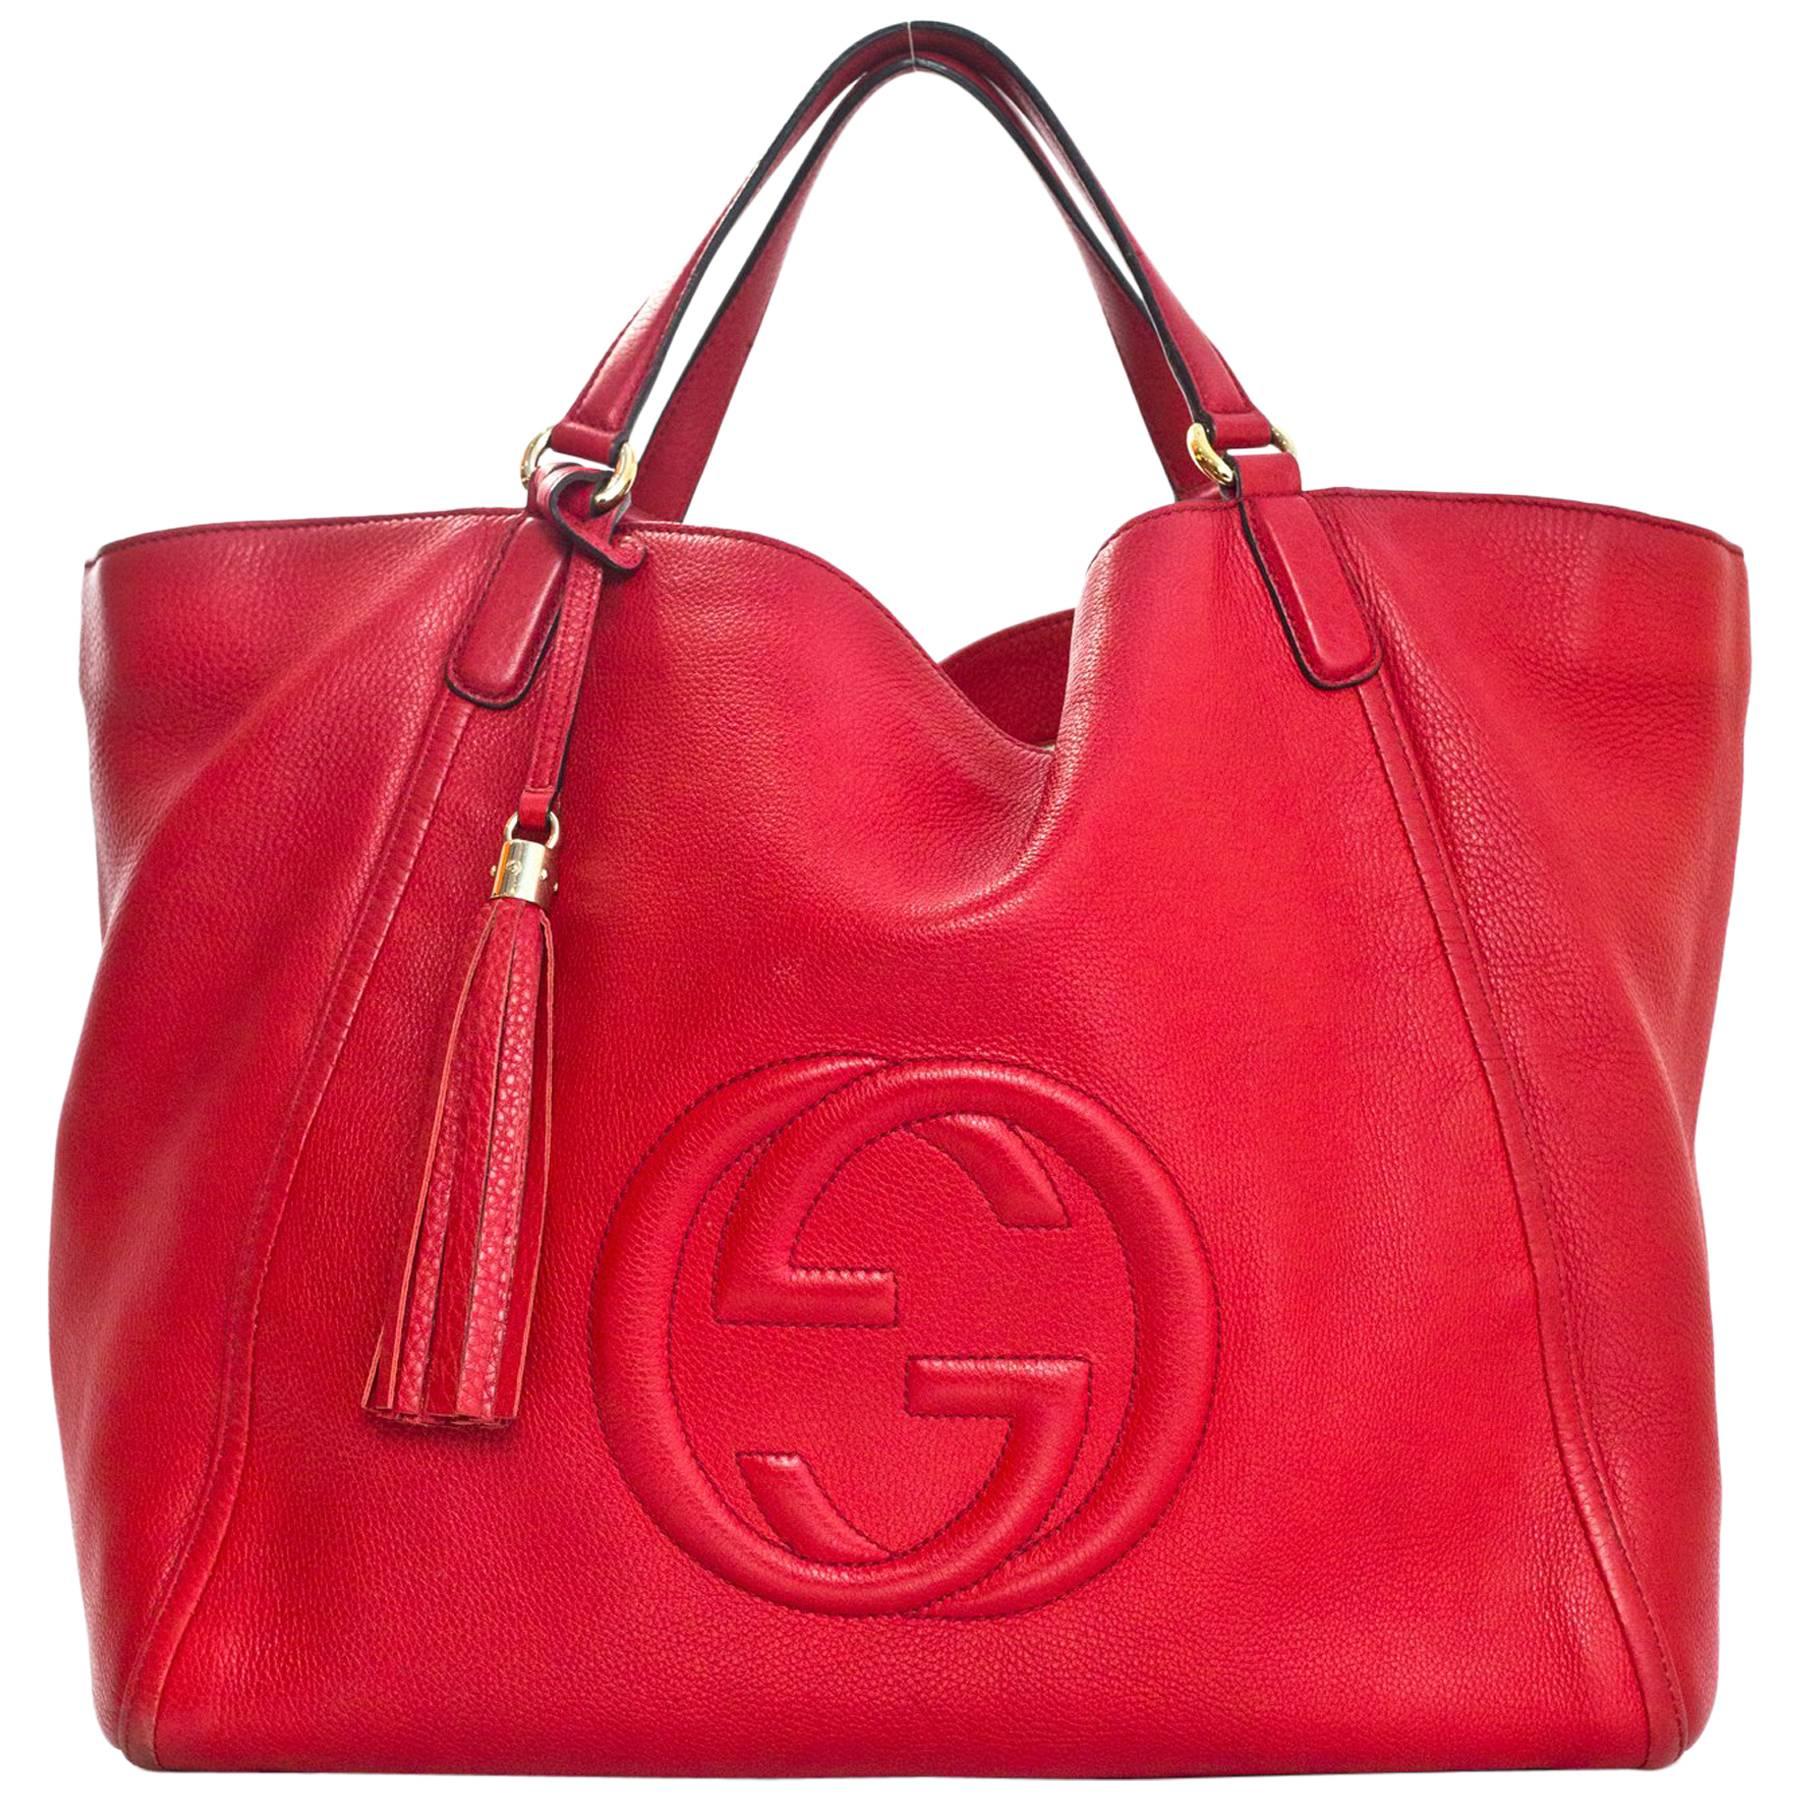 Gucci Red Leather Large Soho Tote Bag